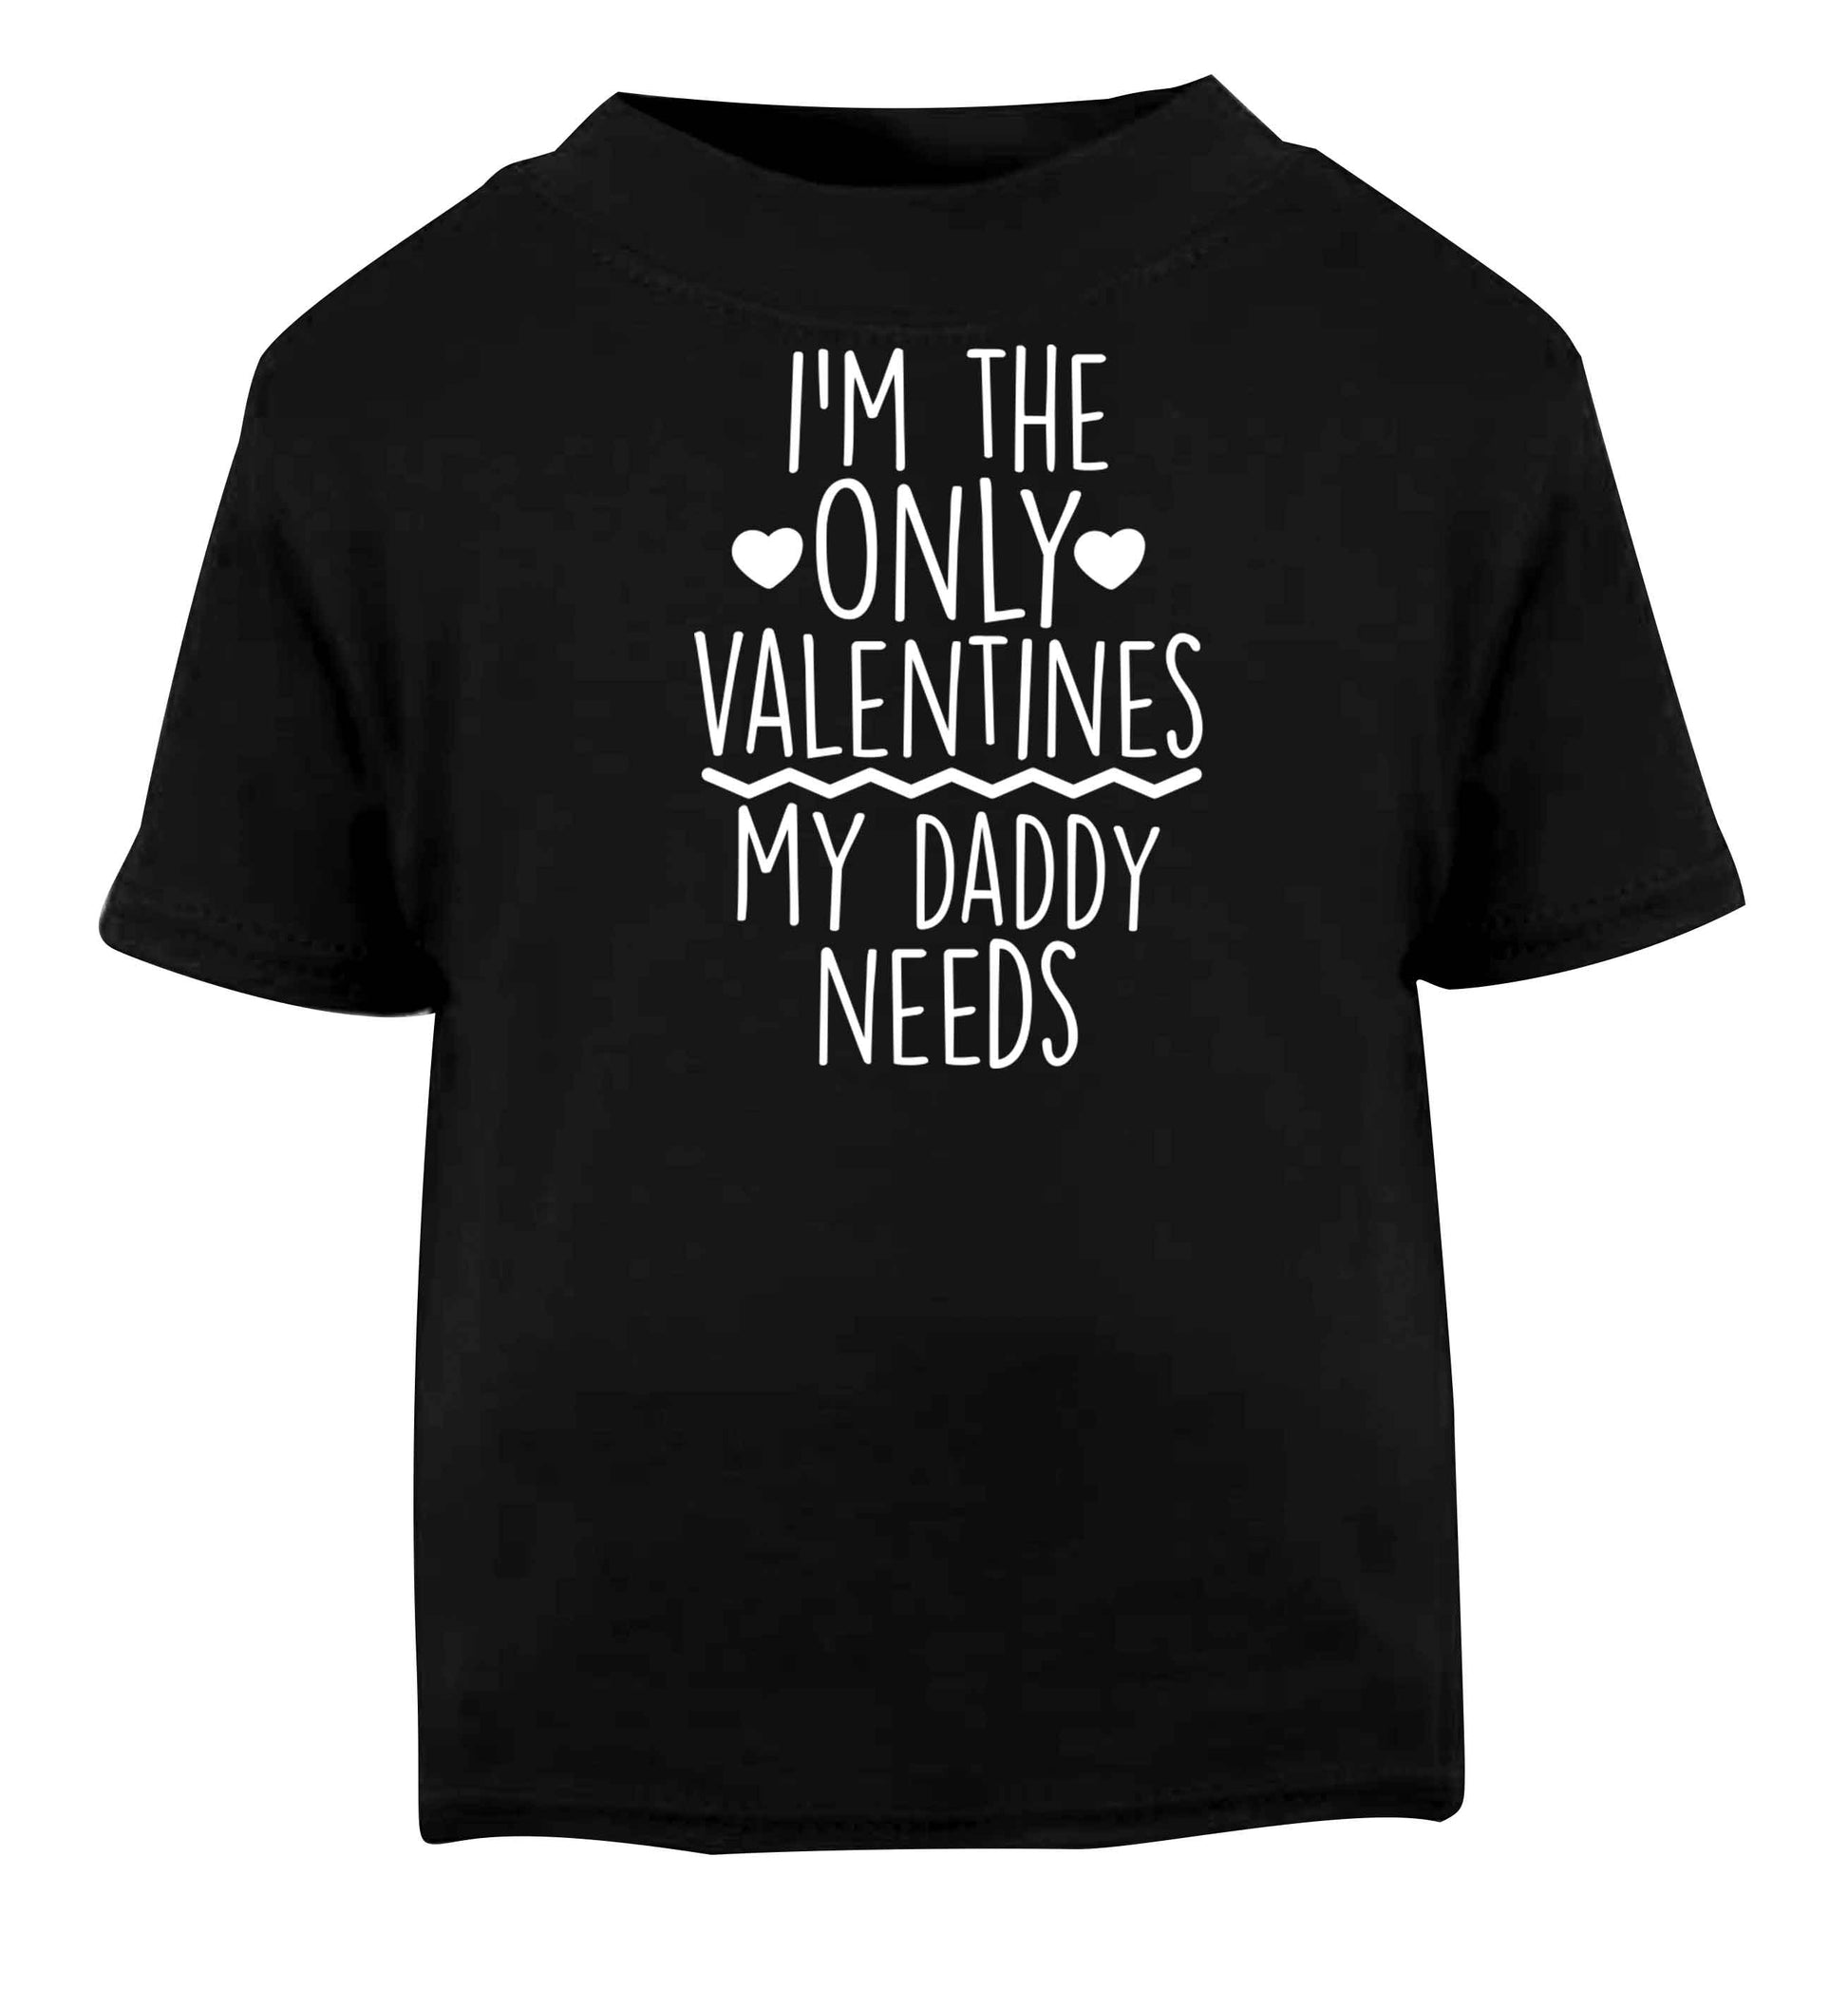 I'm the only valentines my daddy needs Black baby toddler Tshirt 2 years